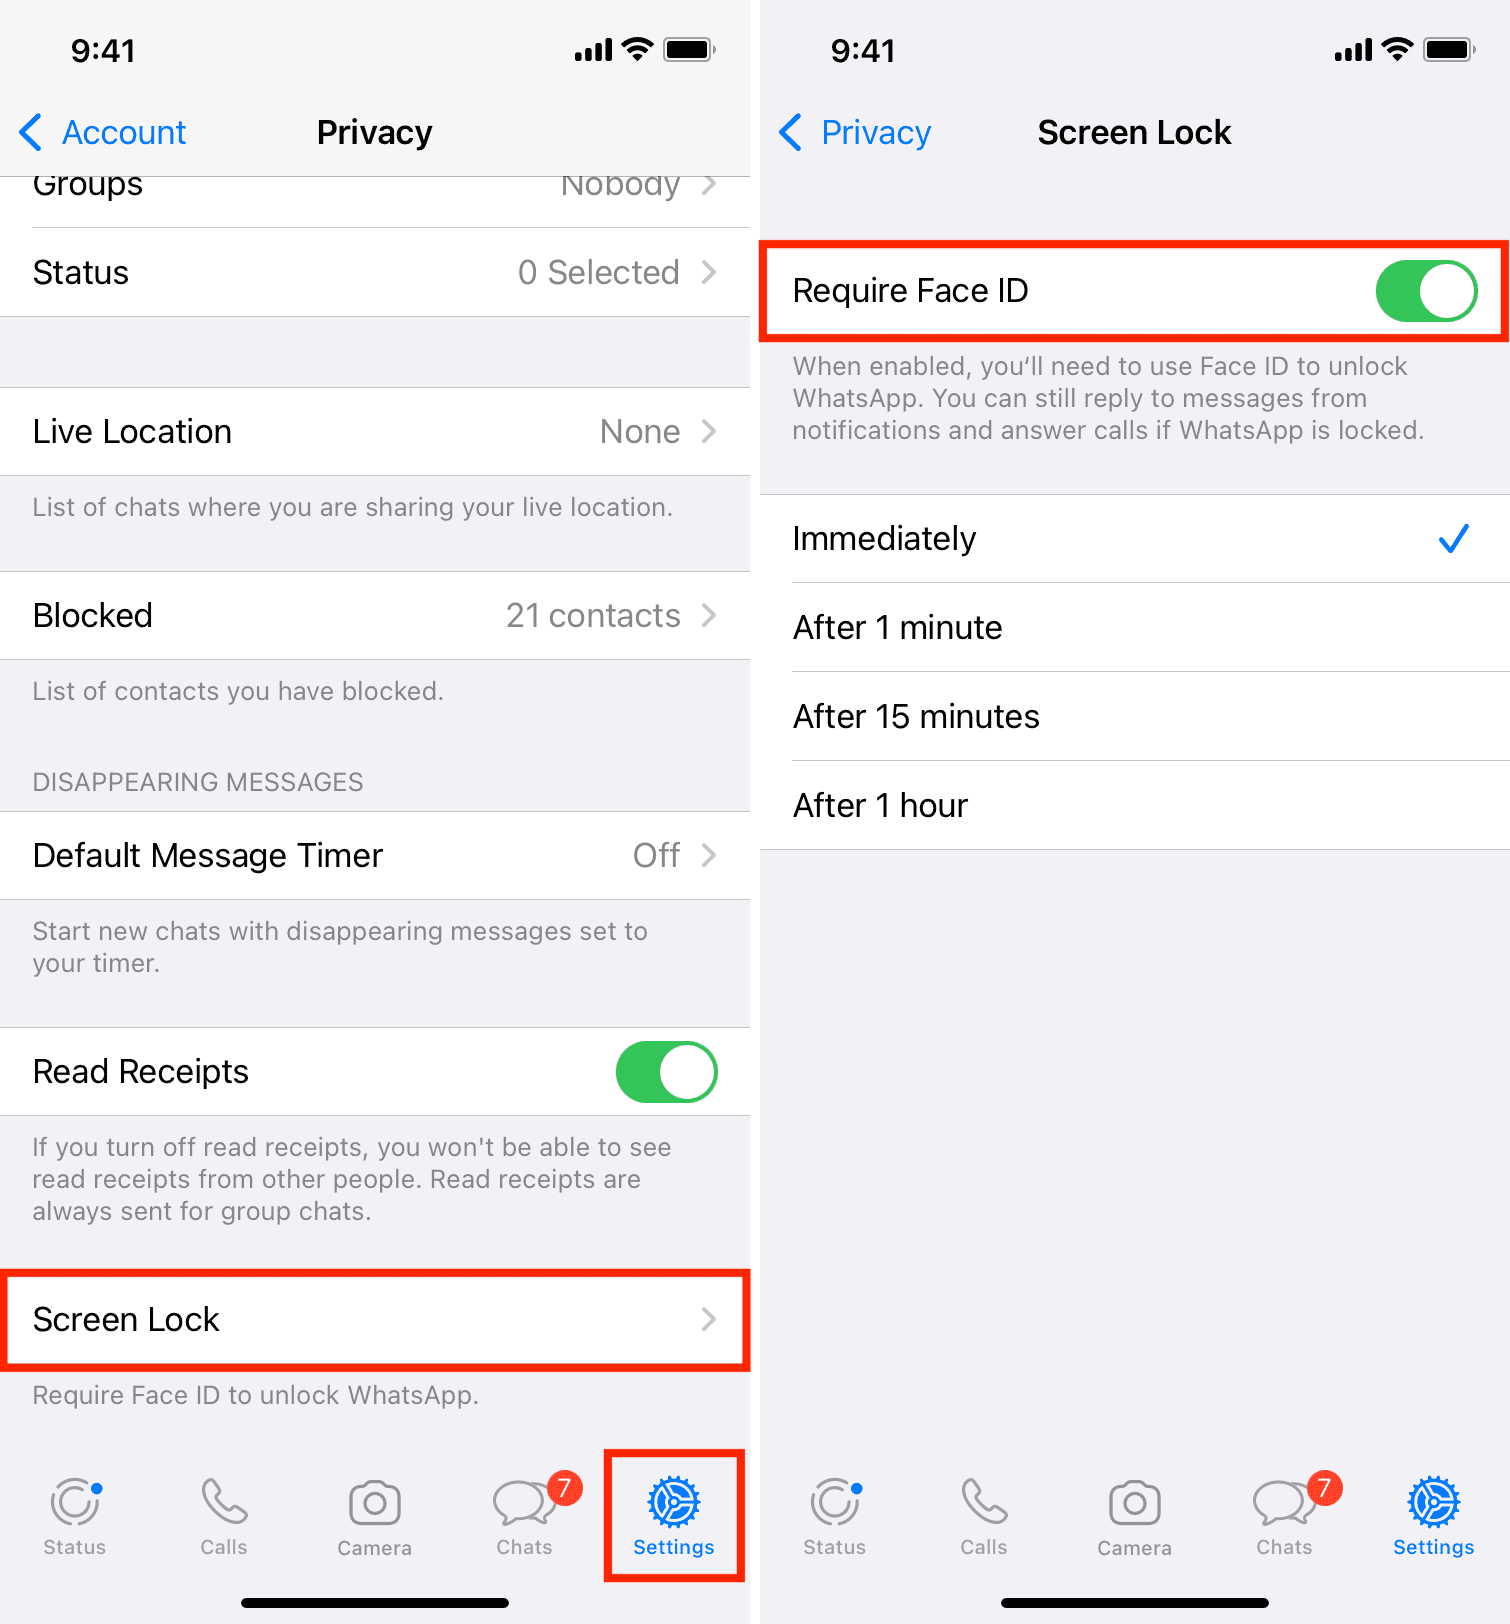 Require Face ID to unlock WhatsApp on iPhone